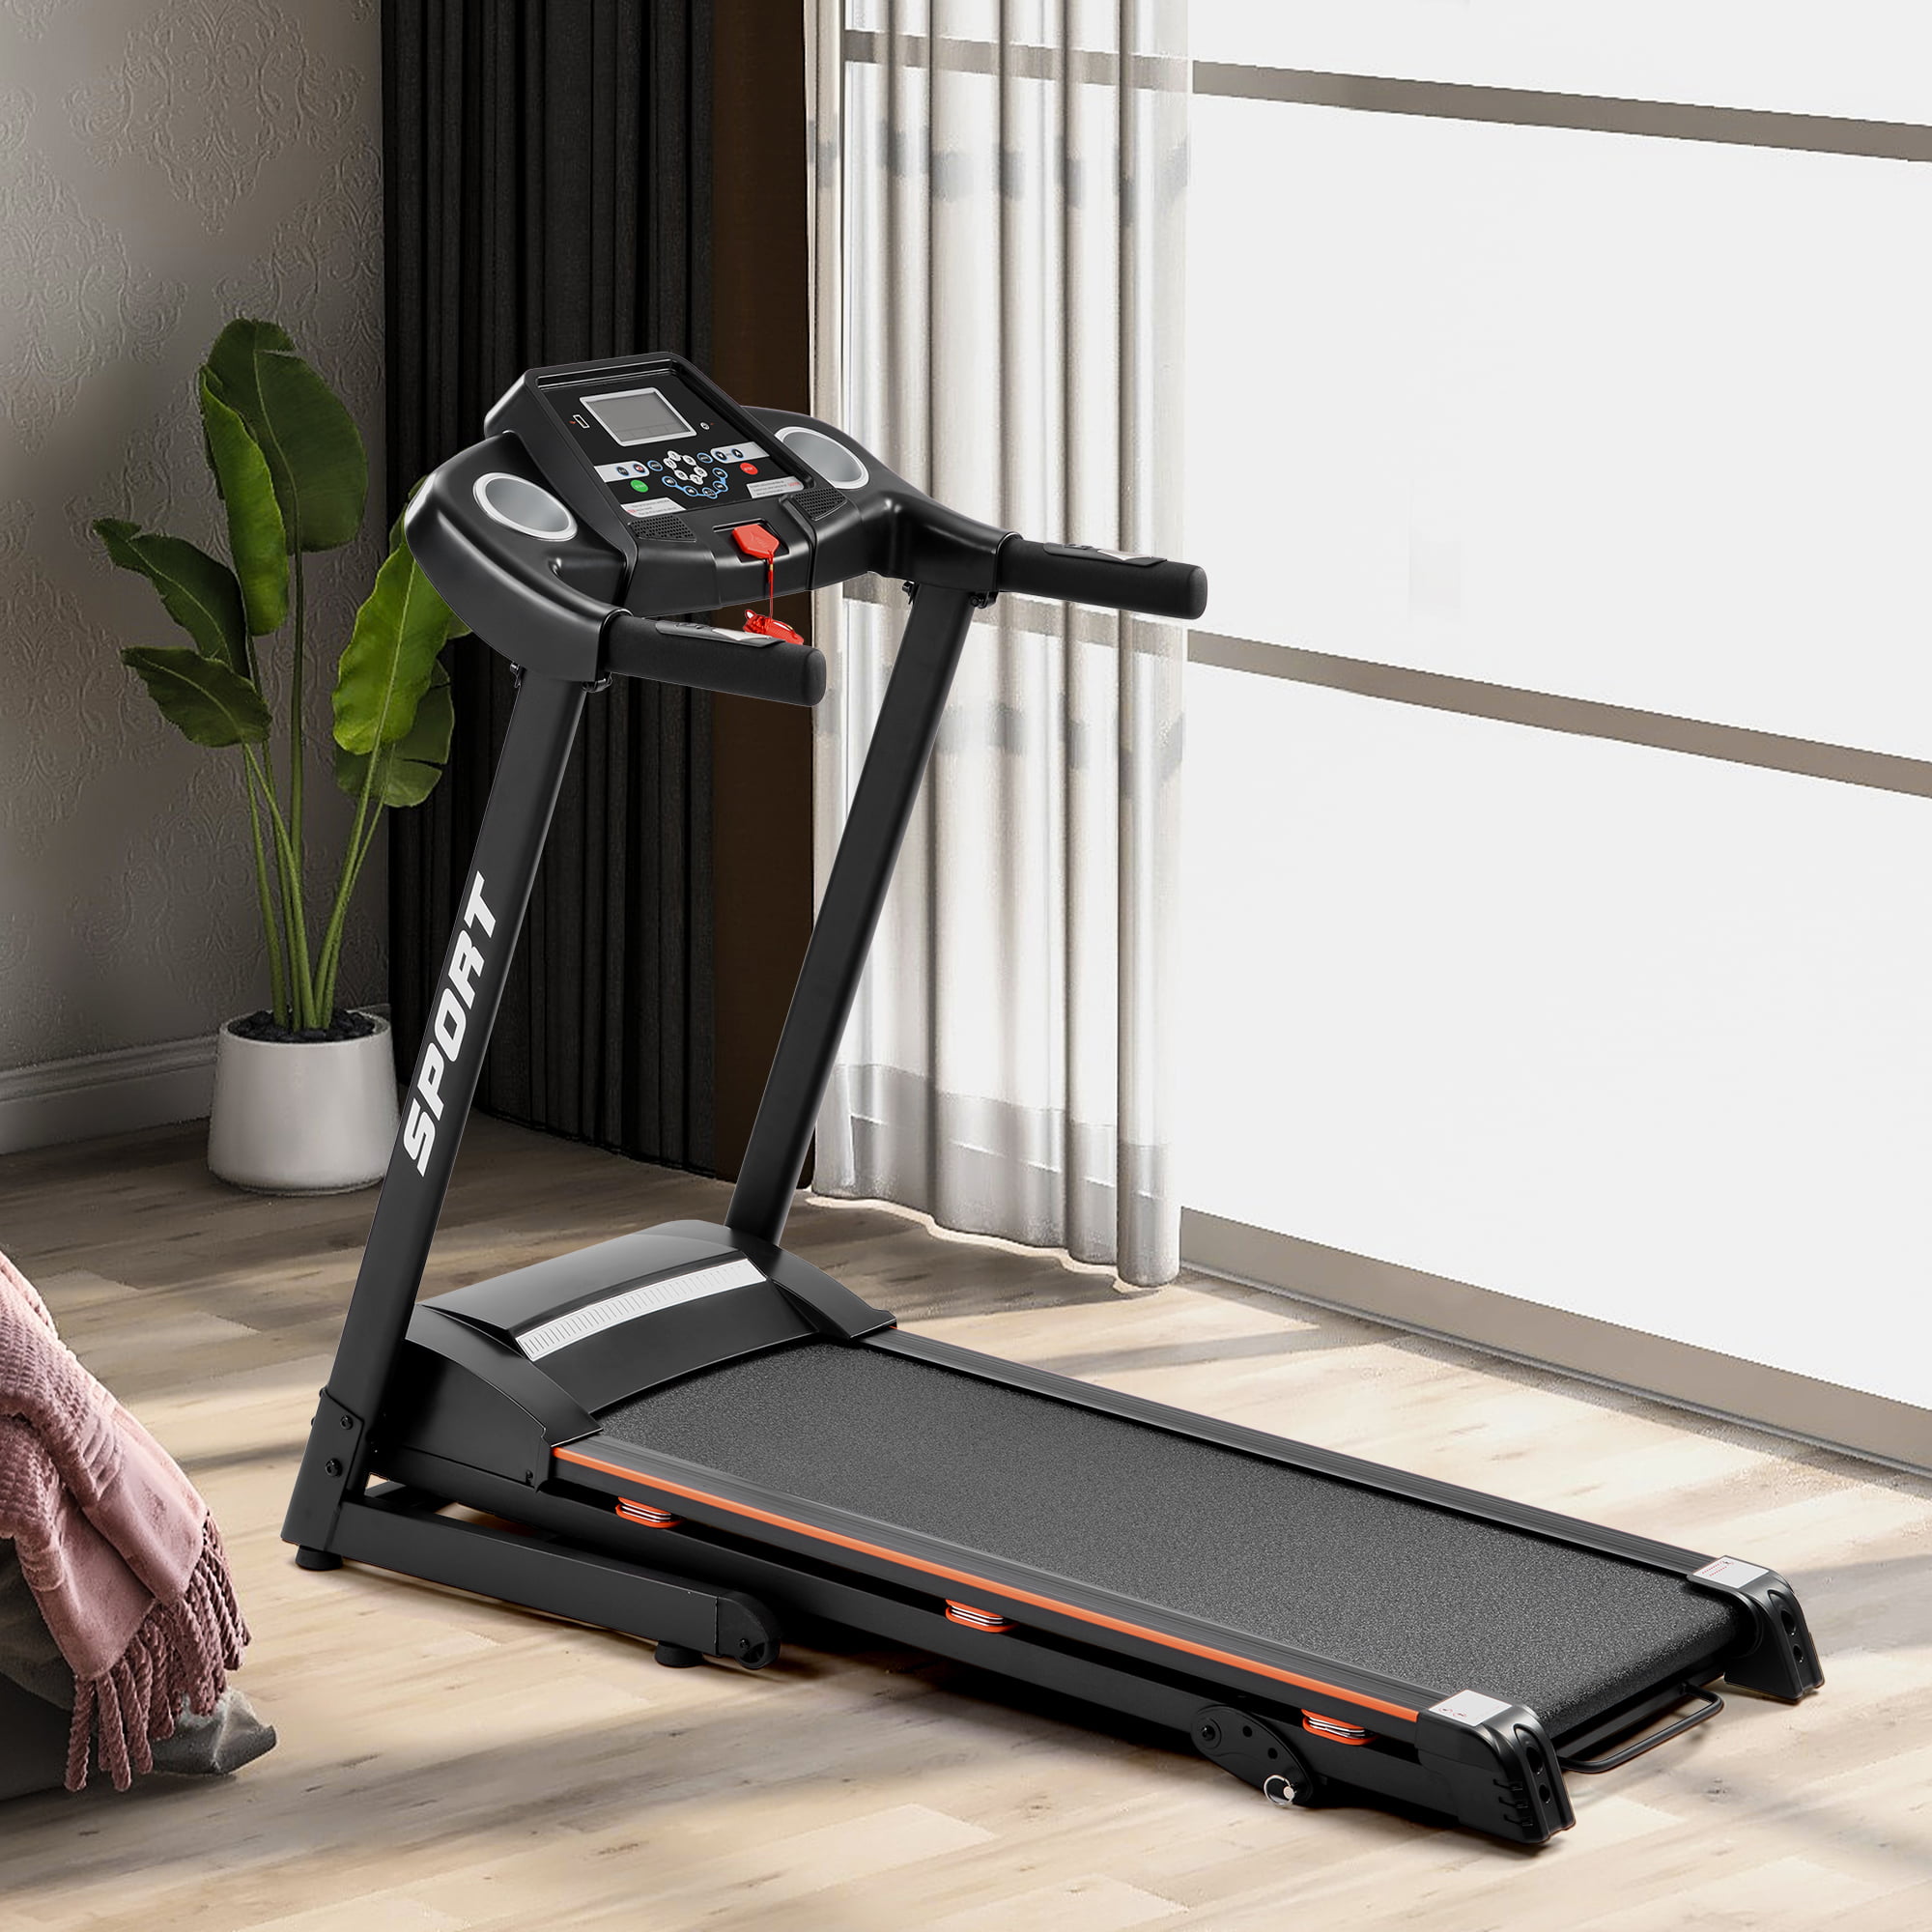  Incline running treadmill workouts for Weight Loss